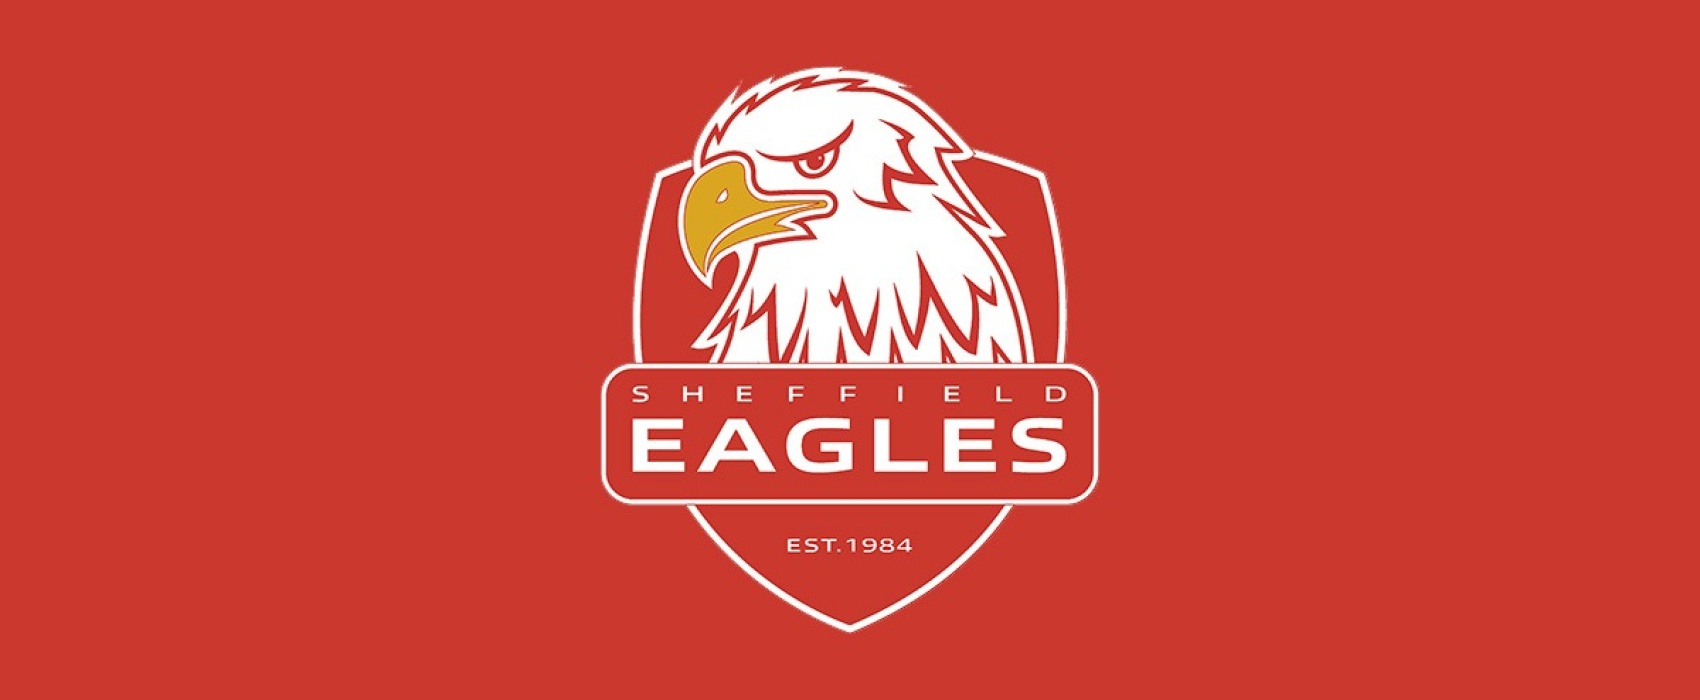 Eagles Website Tender Process Launched